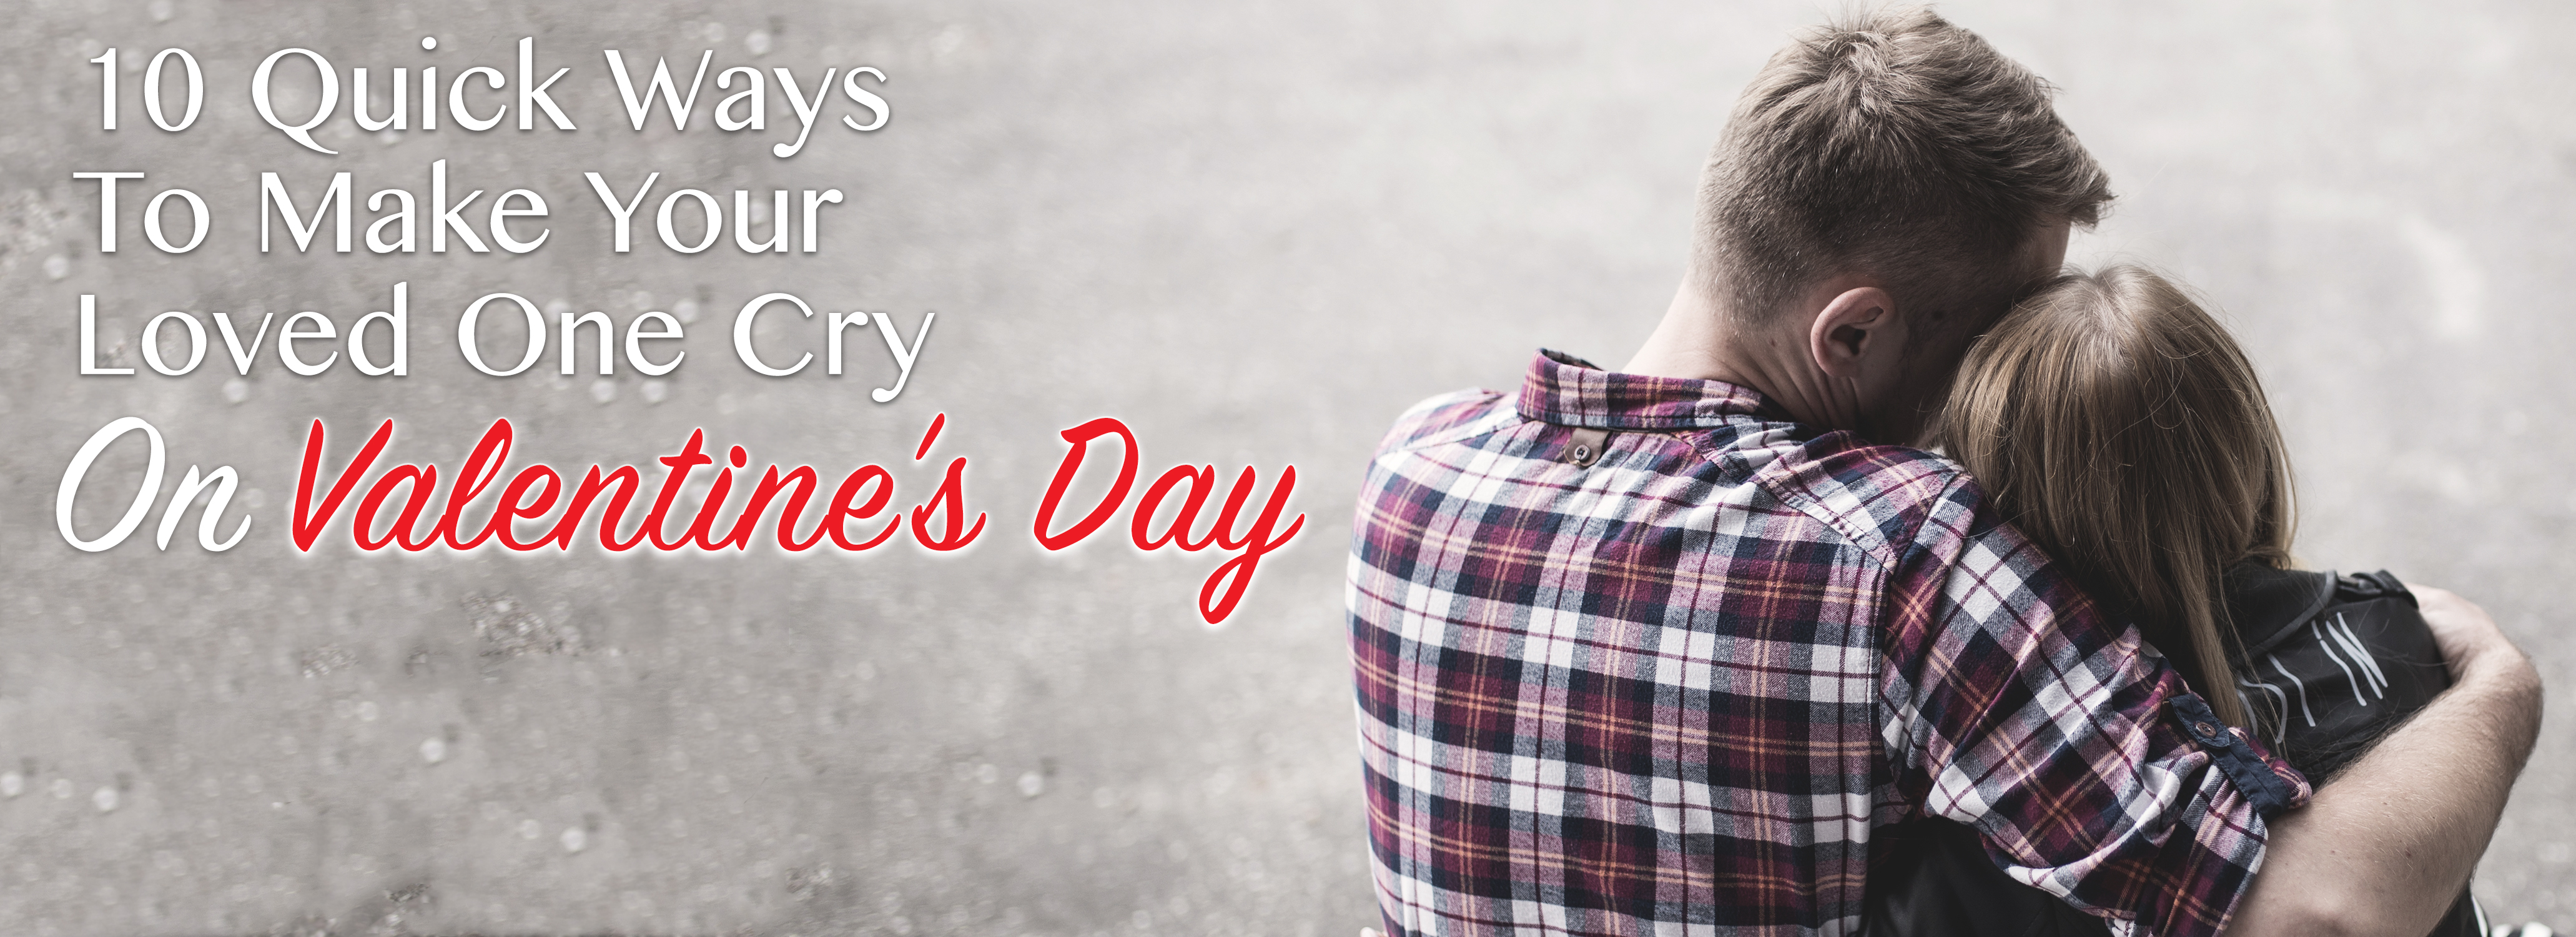 10 Quick Ways To Make Your Loved One Cry On Valentine's Day